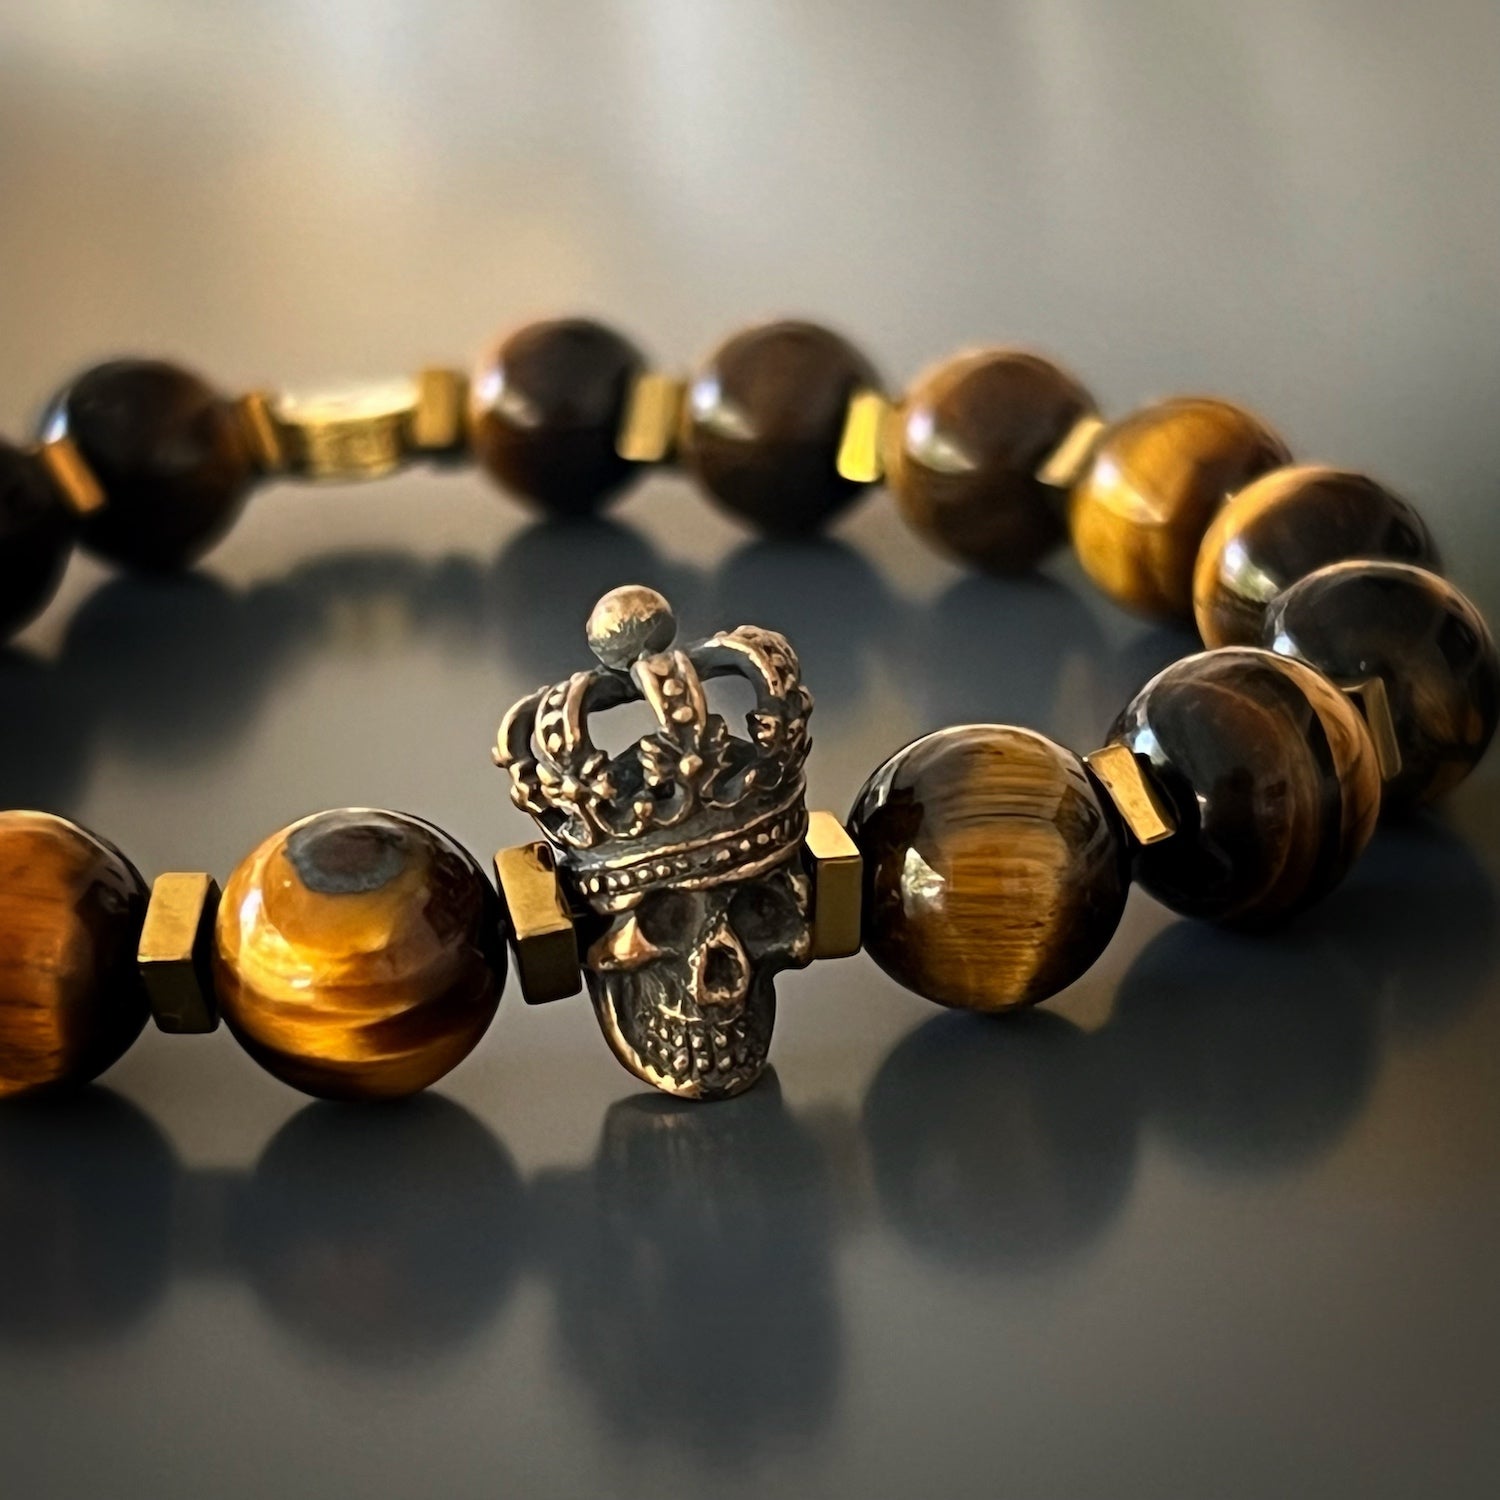 Handcrafted with Care - Tiger's Eye and Hematite Beads.